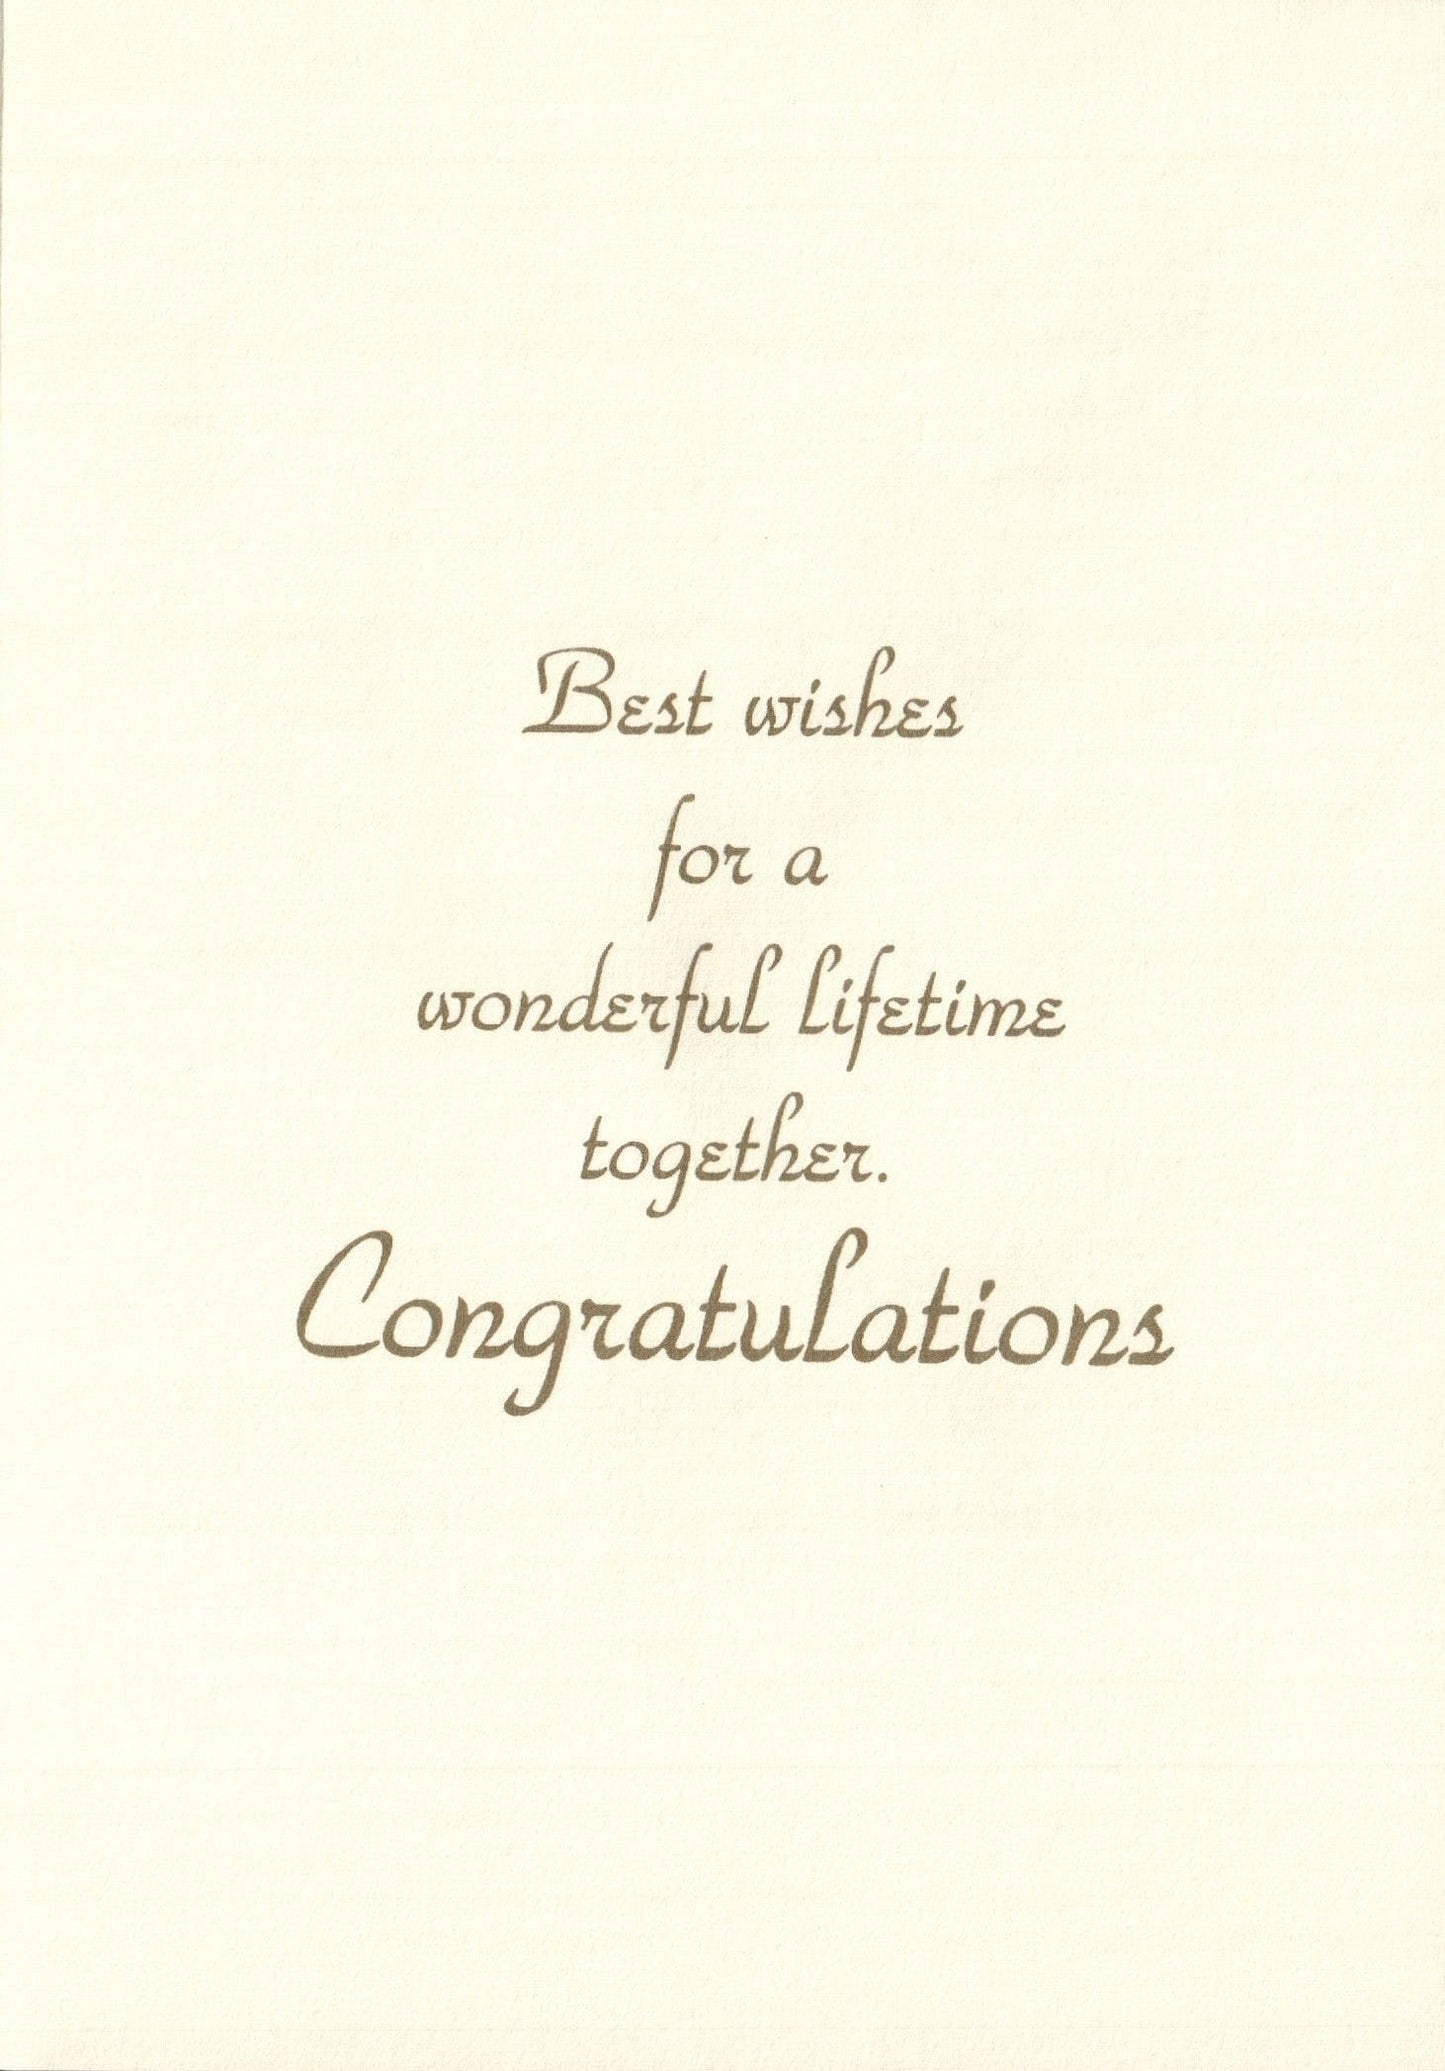 Wedding Card - Best Wishes For A Wonderful Lifetime - Shelburne Country Store